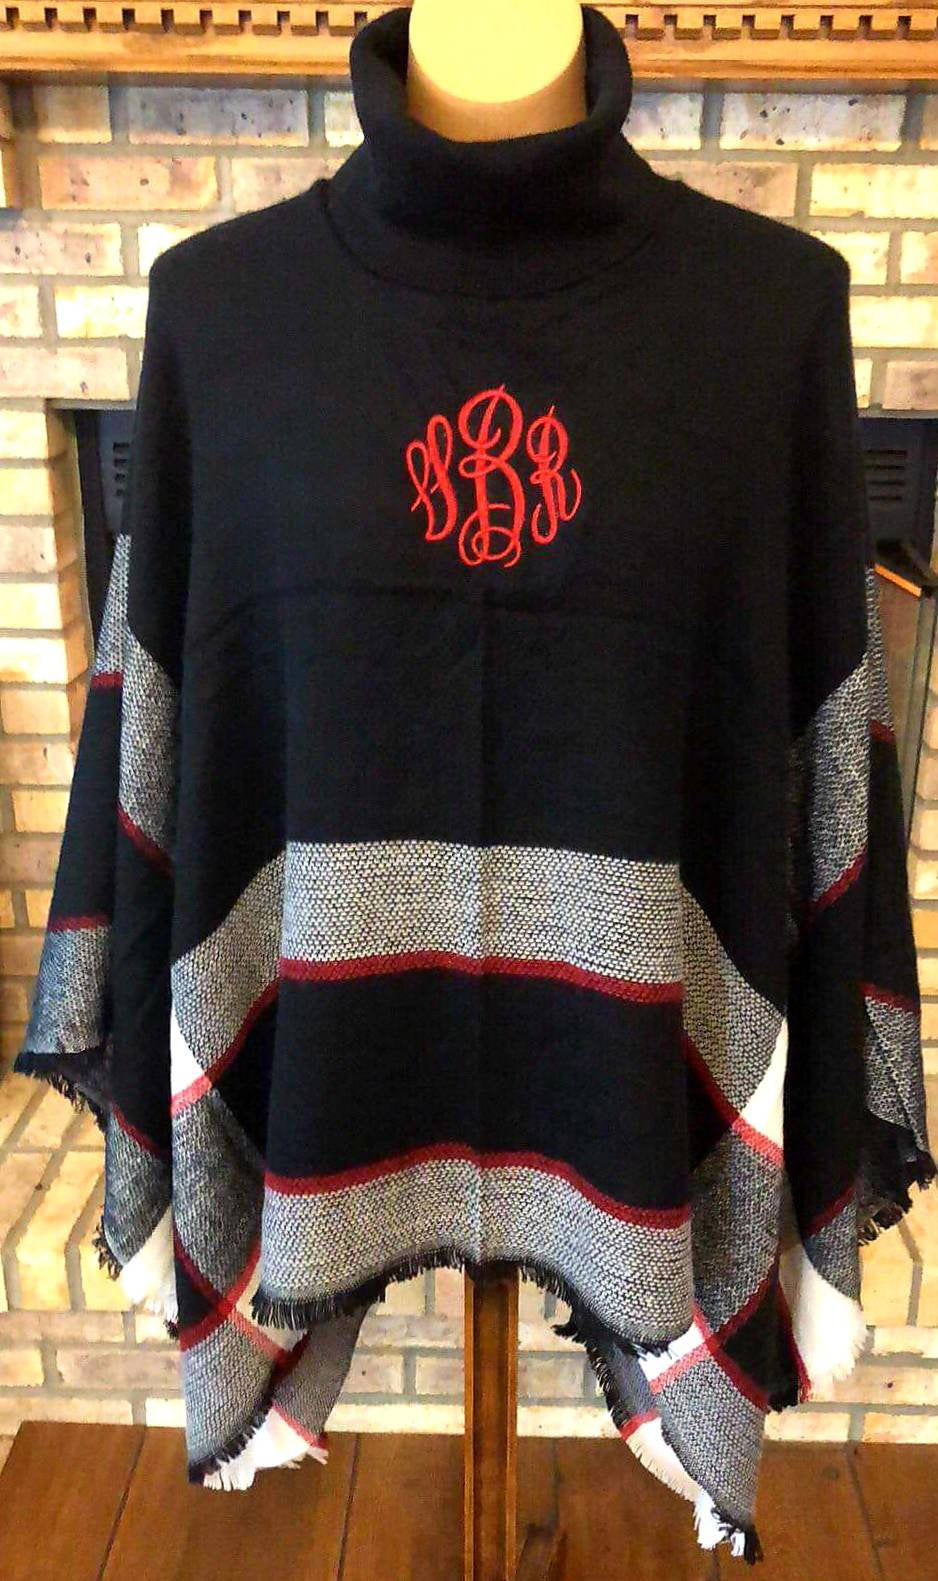 Monogrammed Poncho - Embroidered Knit Turtleneck Ponchos, Black and Red Poncho, Shawl, Cape, Knit Sweater Top, Personalized Gift